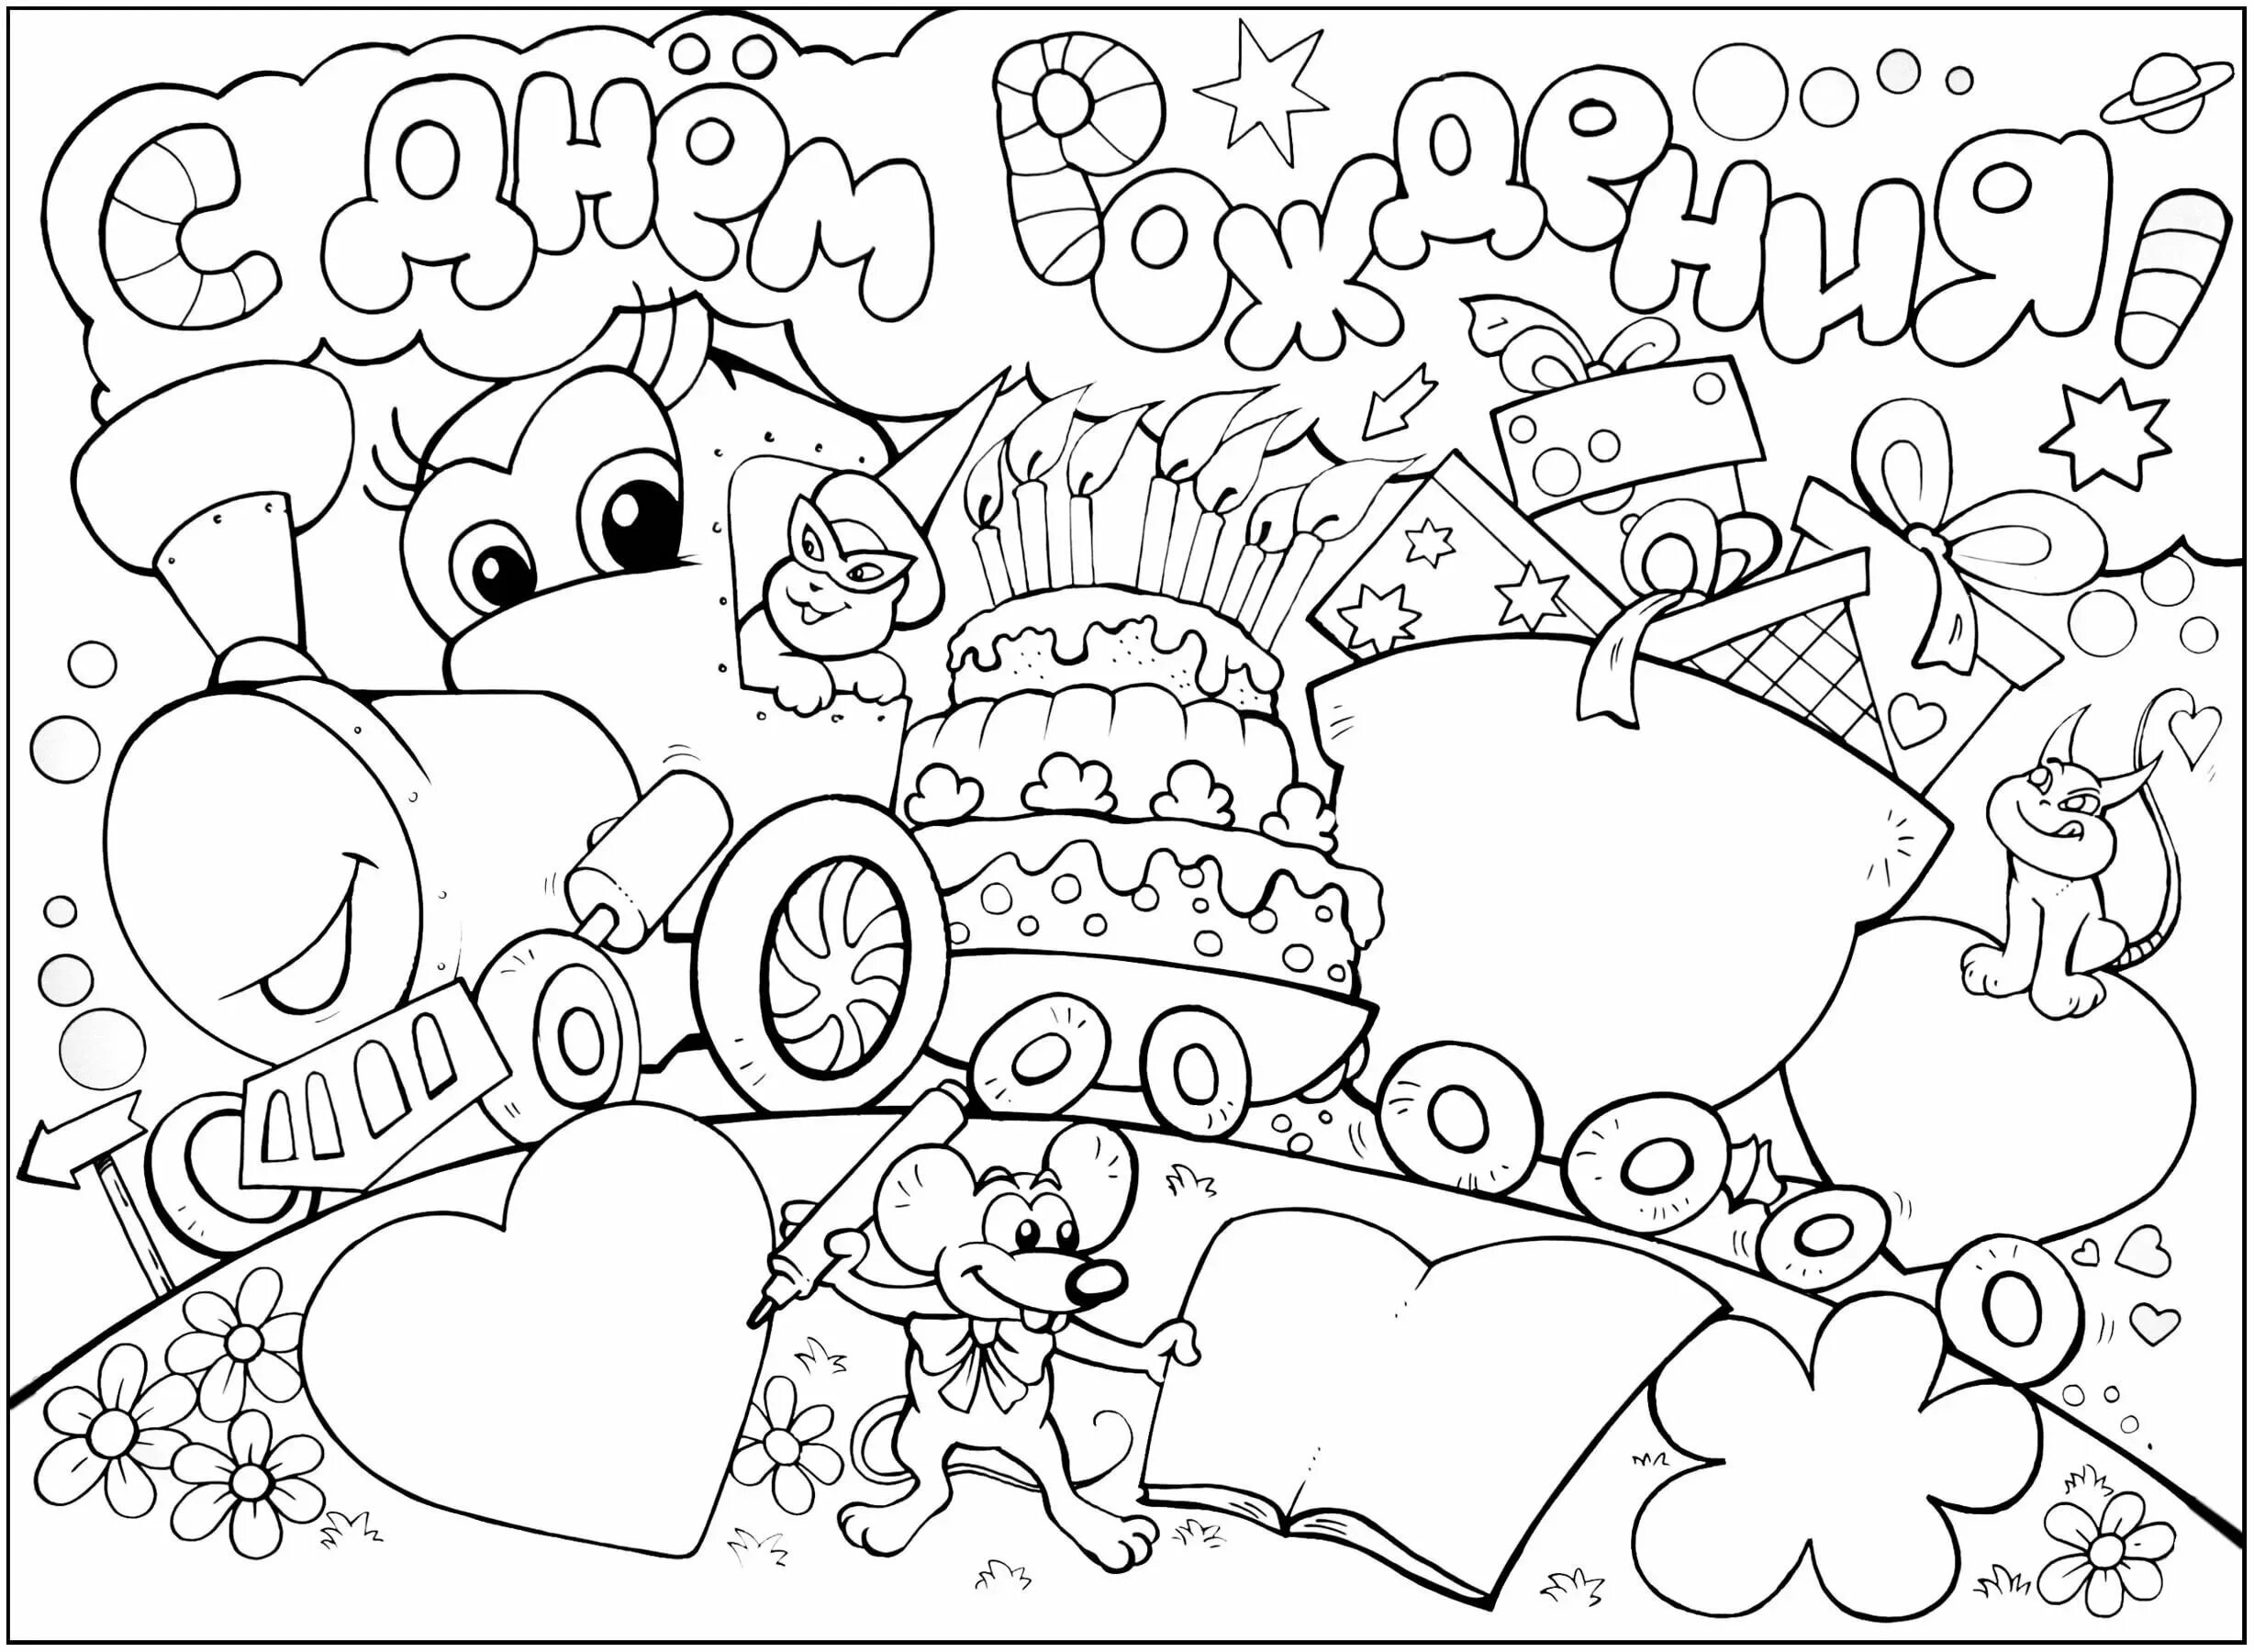 Color-galore happy birthday sister coloring page